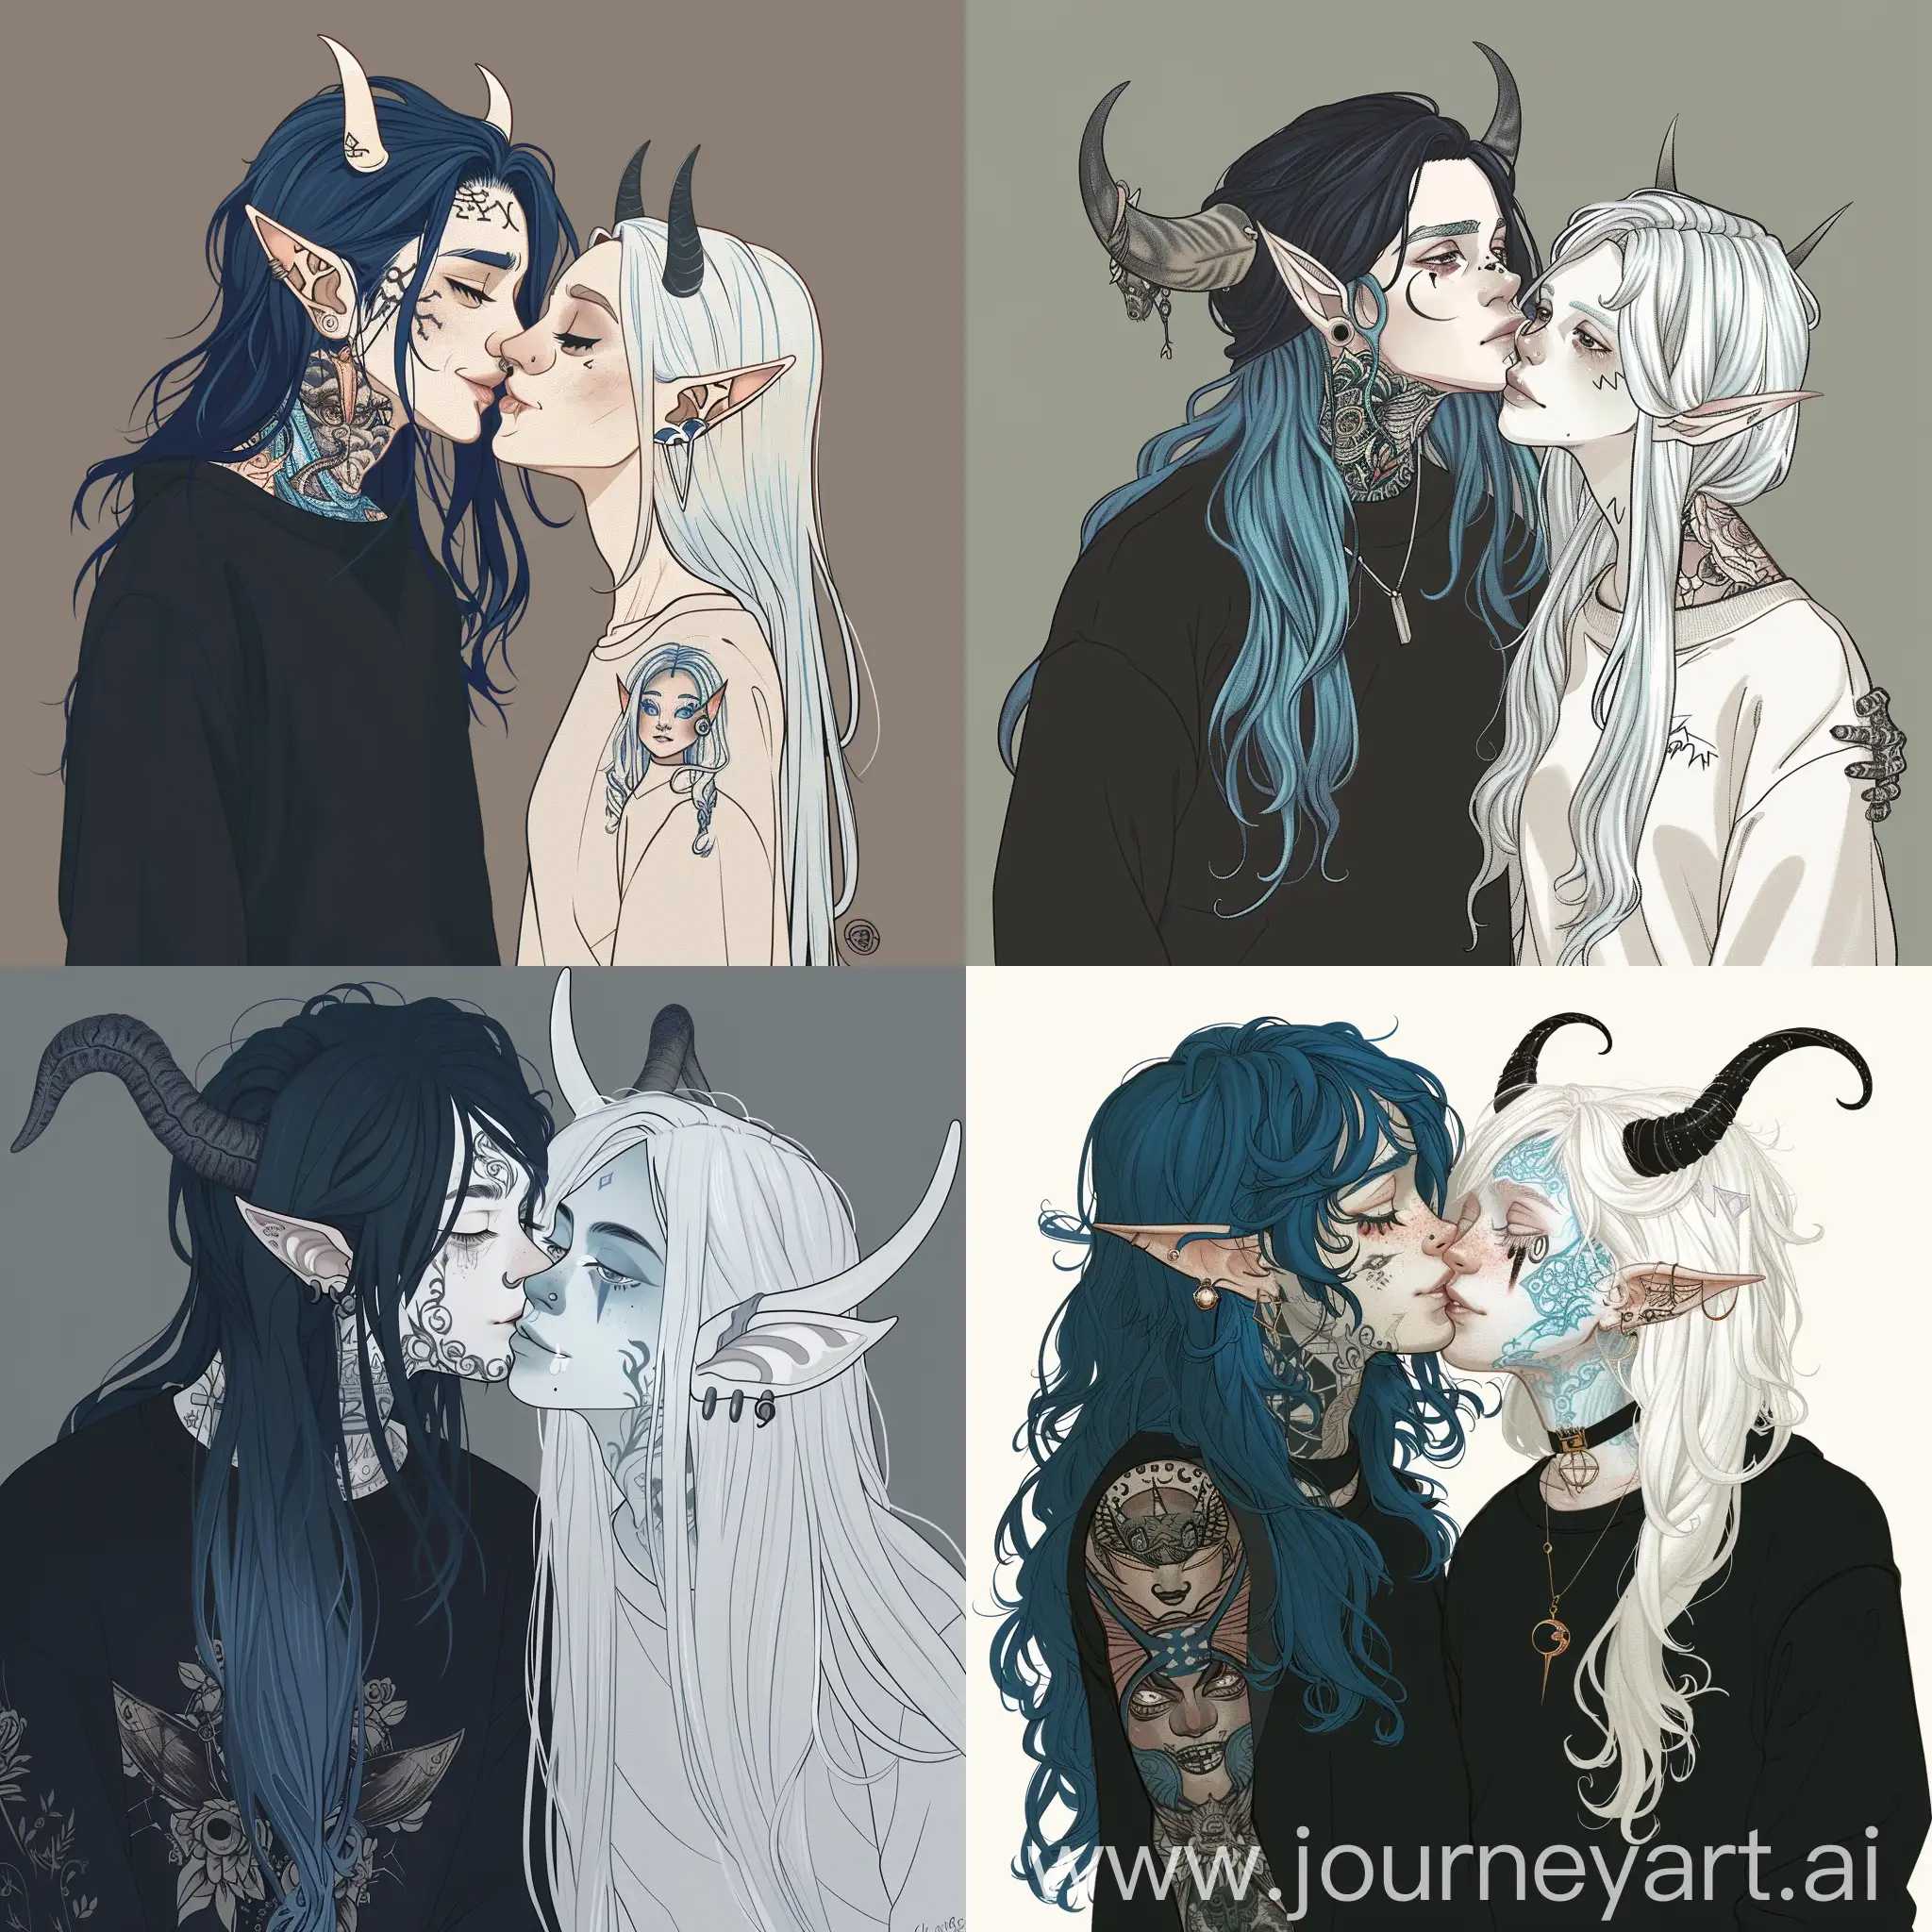 Fantasy-Romance-BlueHaired-Boy-and-WhiteHaired-Girl-Share-a-Tender-Kiss